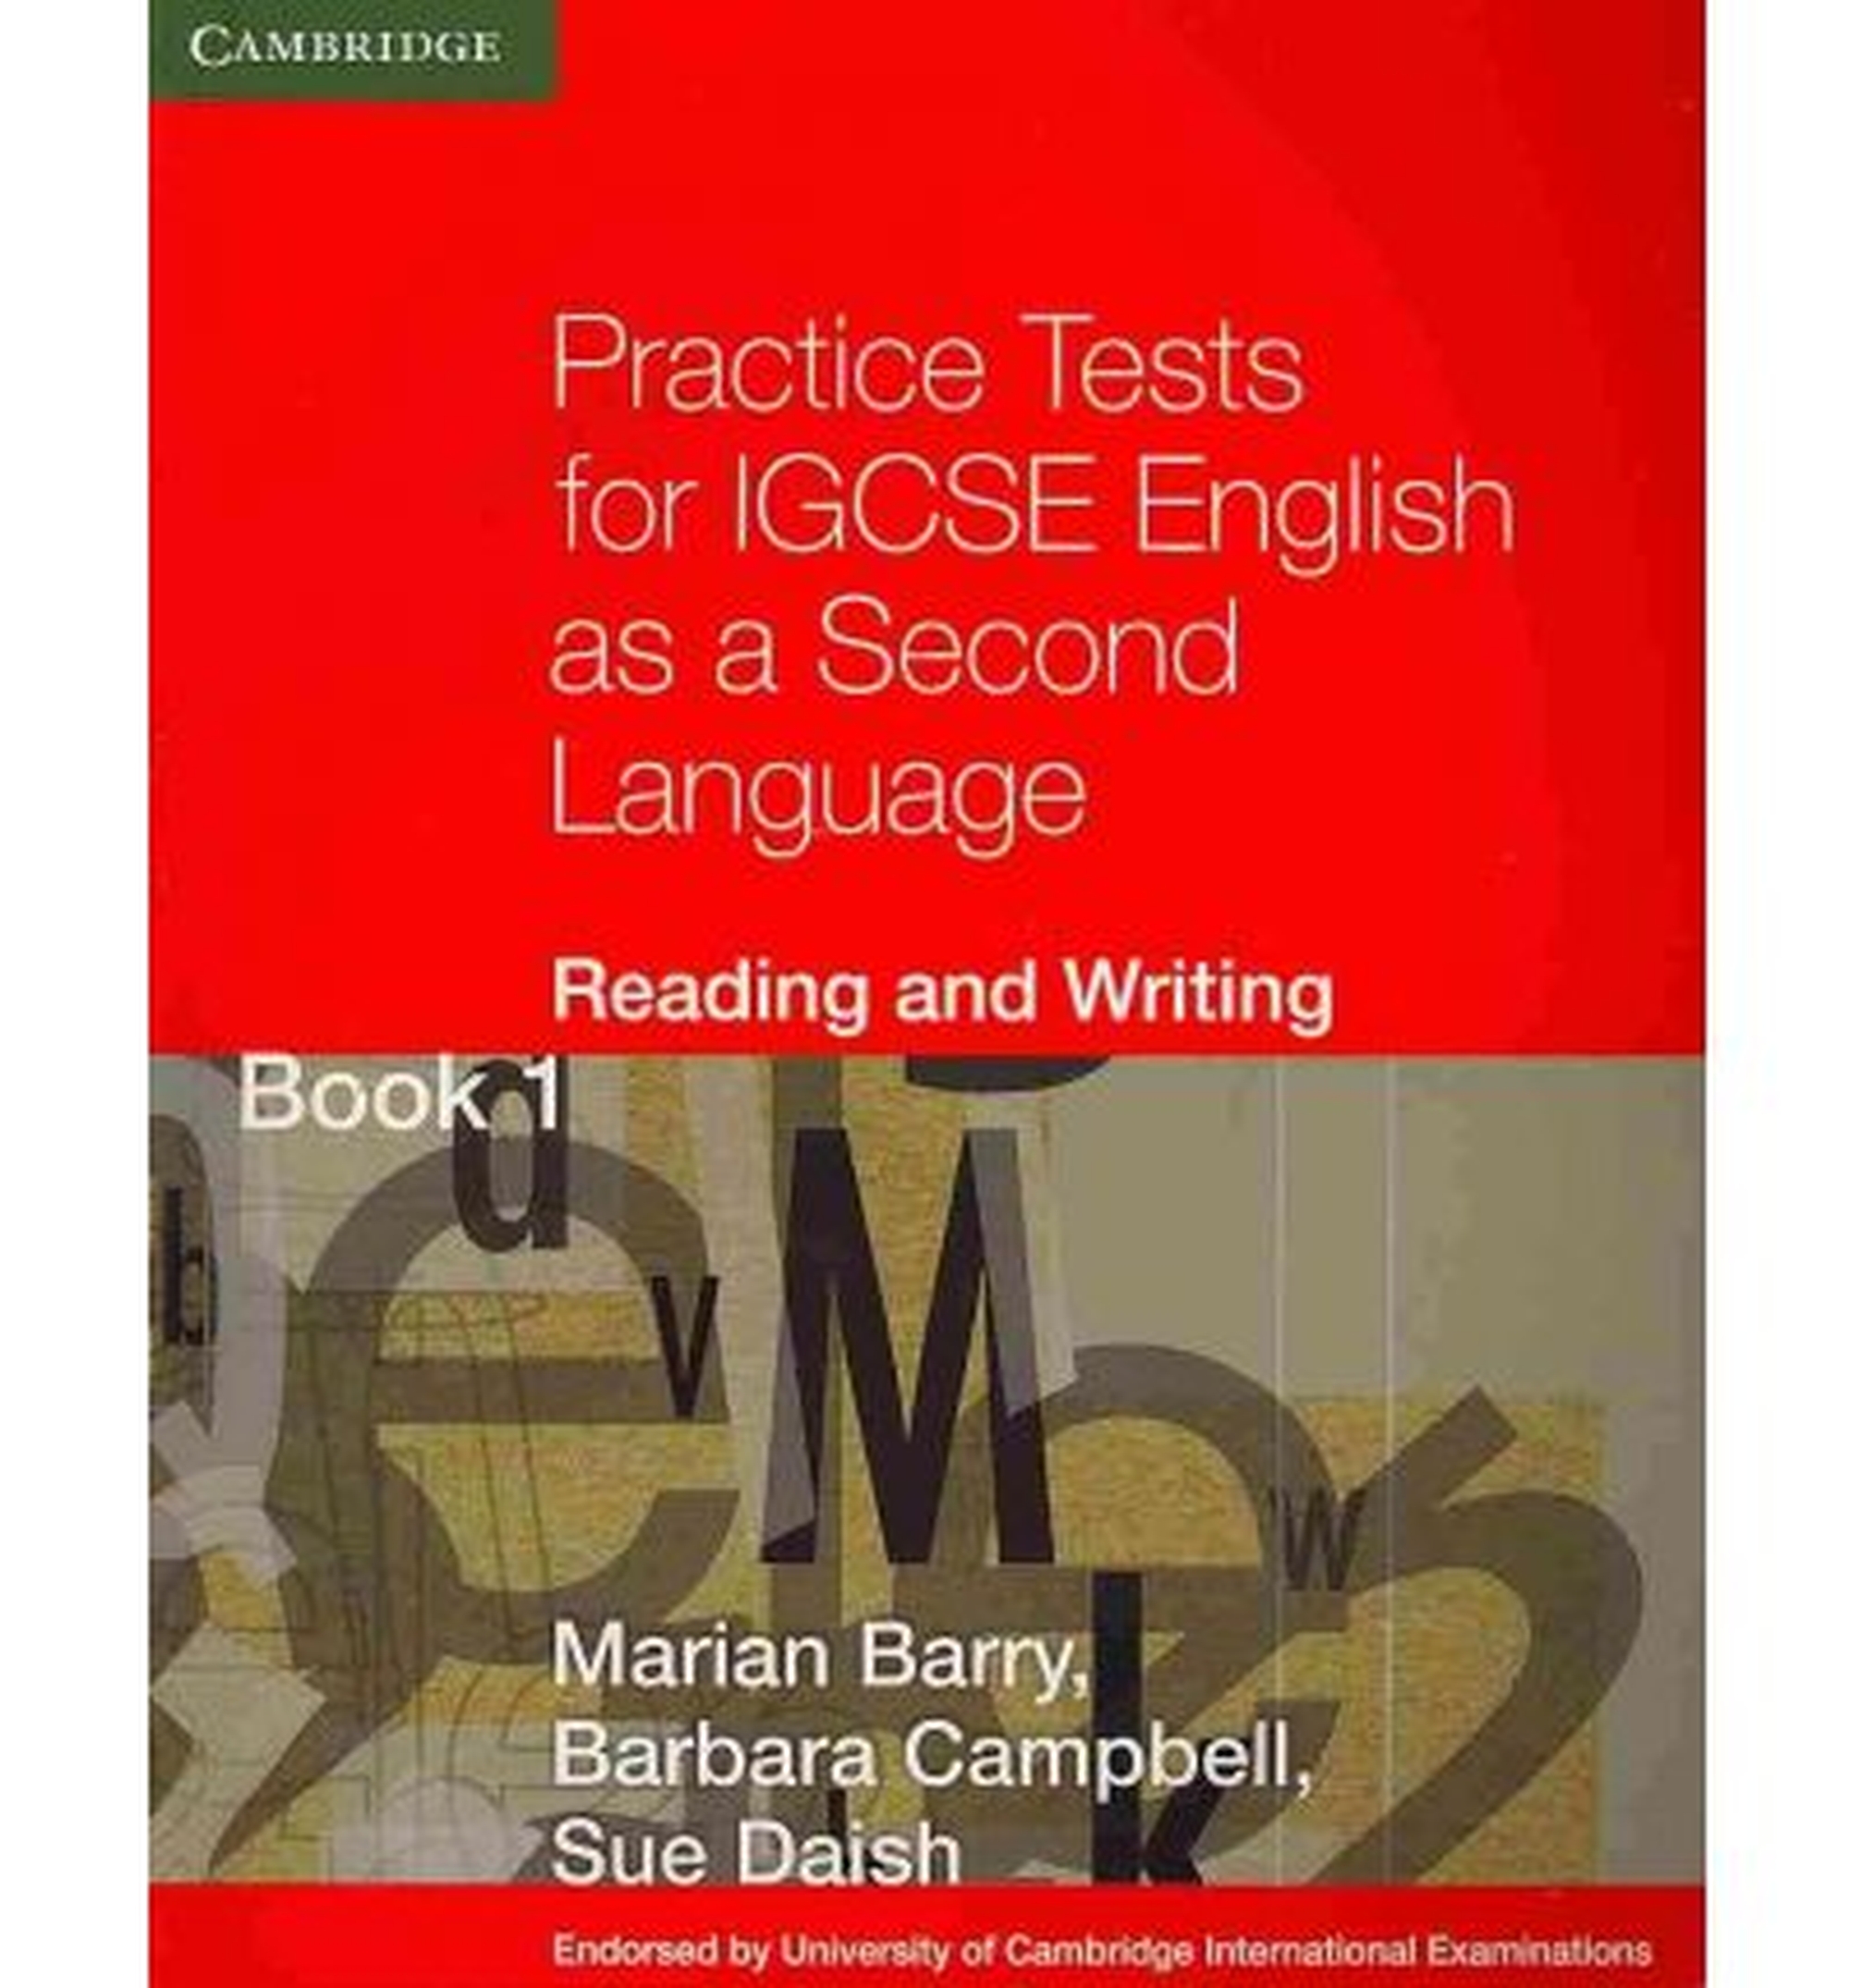 parga-bookstore-practice-tests-for-igcse-english-as-a-second-language-reading-and-writing-book-1